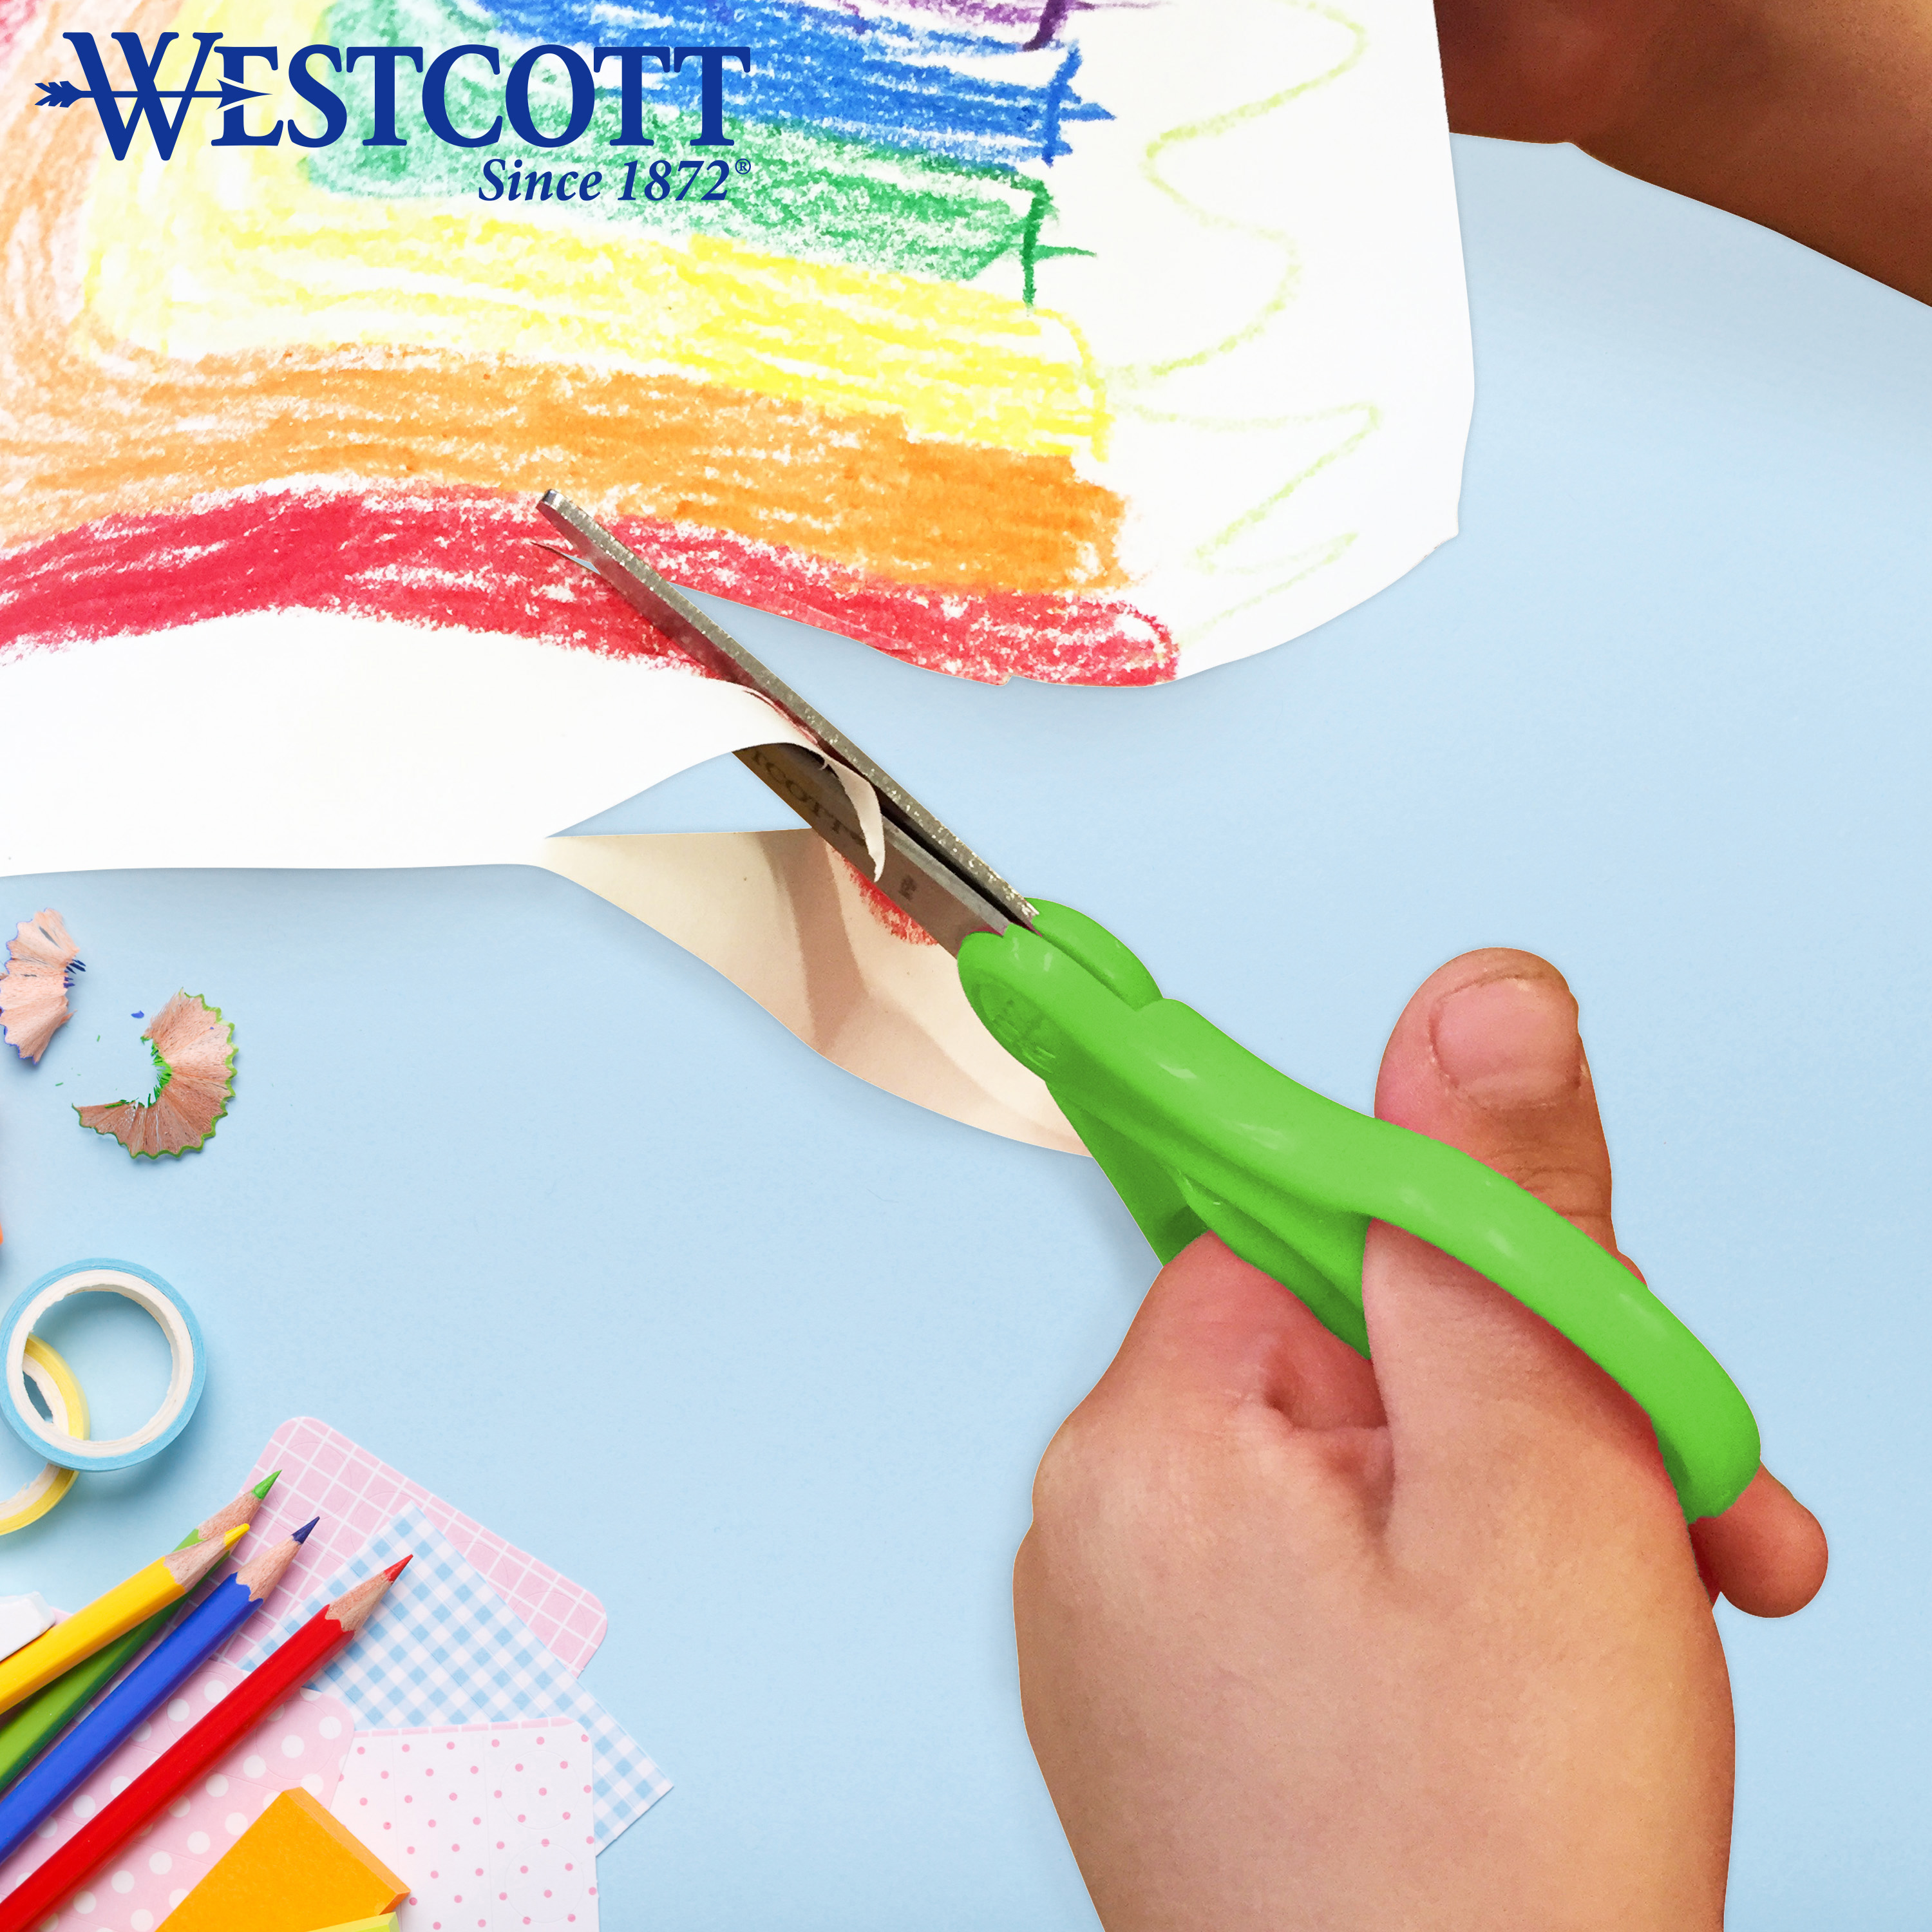 Westcott® Hard Handle Kids Value Scissors, 5", Pointed, Assorted Colors, 2 Pack - image 5 of 9